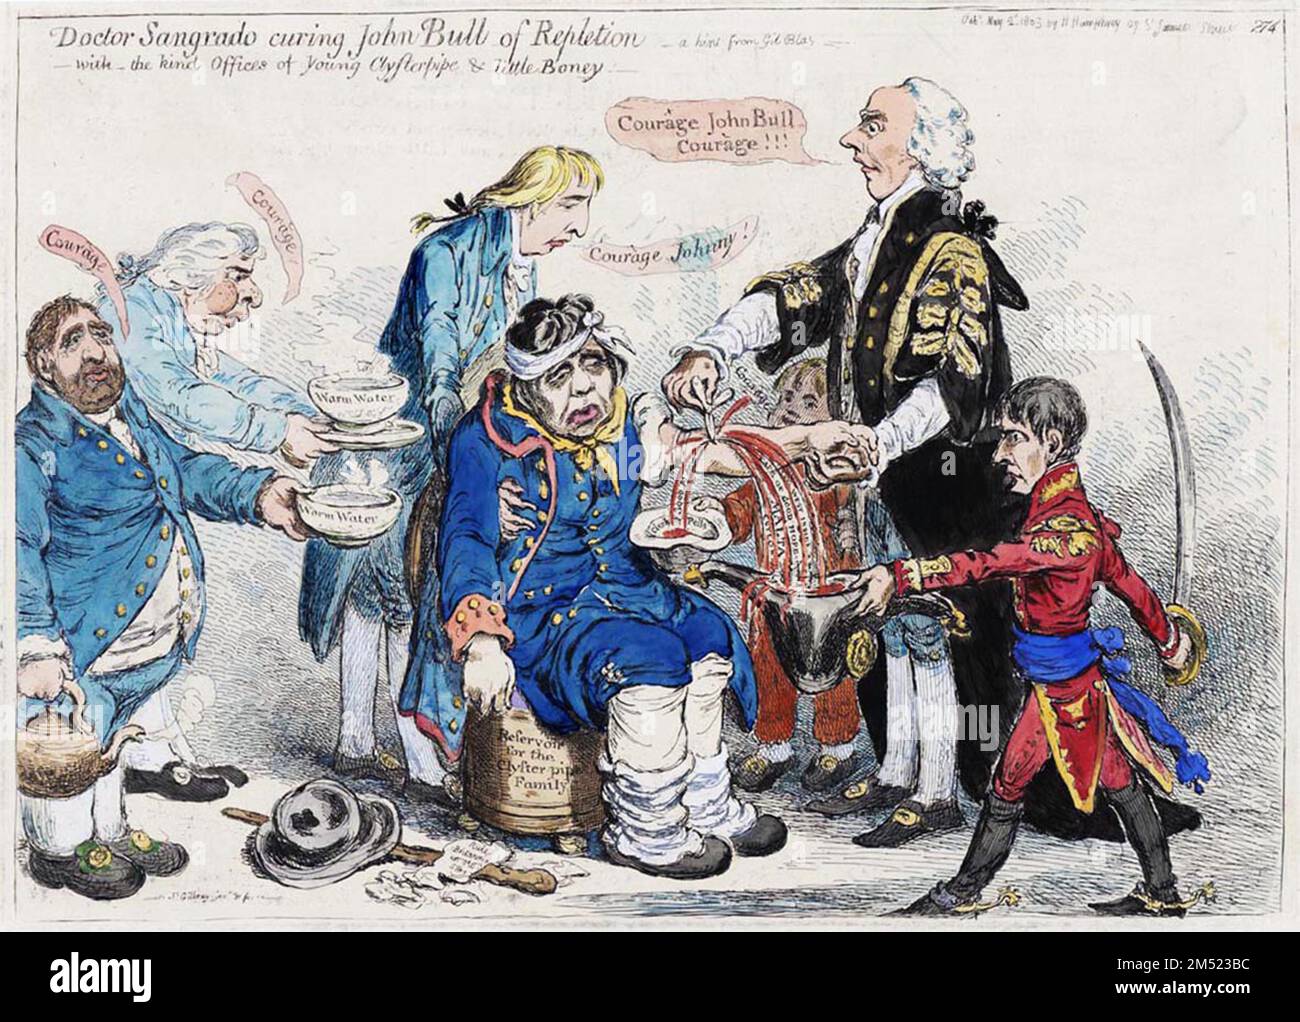 Coloured etching of, Henry Addington, Britain's Prime Minister 1801-1804, bleeding John Bull (Great Britain). Addington, the son of a physician, was known as 'The Doctor.' The artist,Gillray, compares the effectiveness of Addington's policies to that of bleeding a patient. To the side stands the enemy, Napoleon, ready to benefit from a weakened Great Britain. Published 1803. Stock Photo